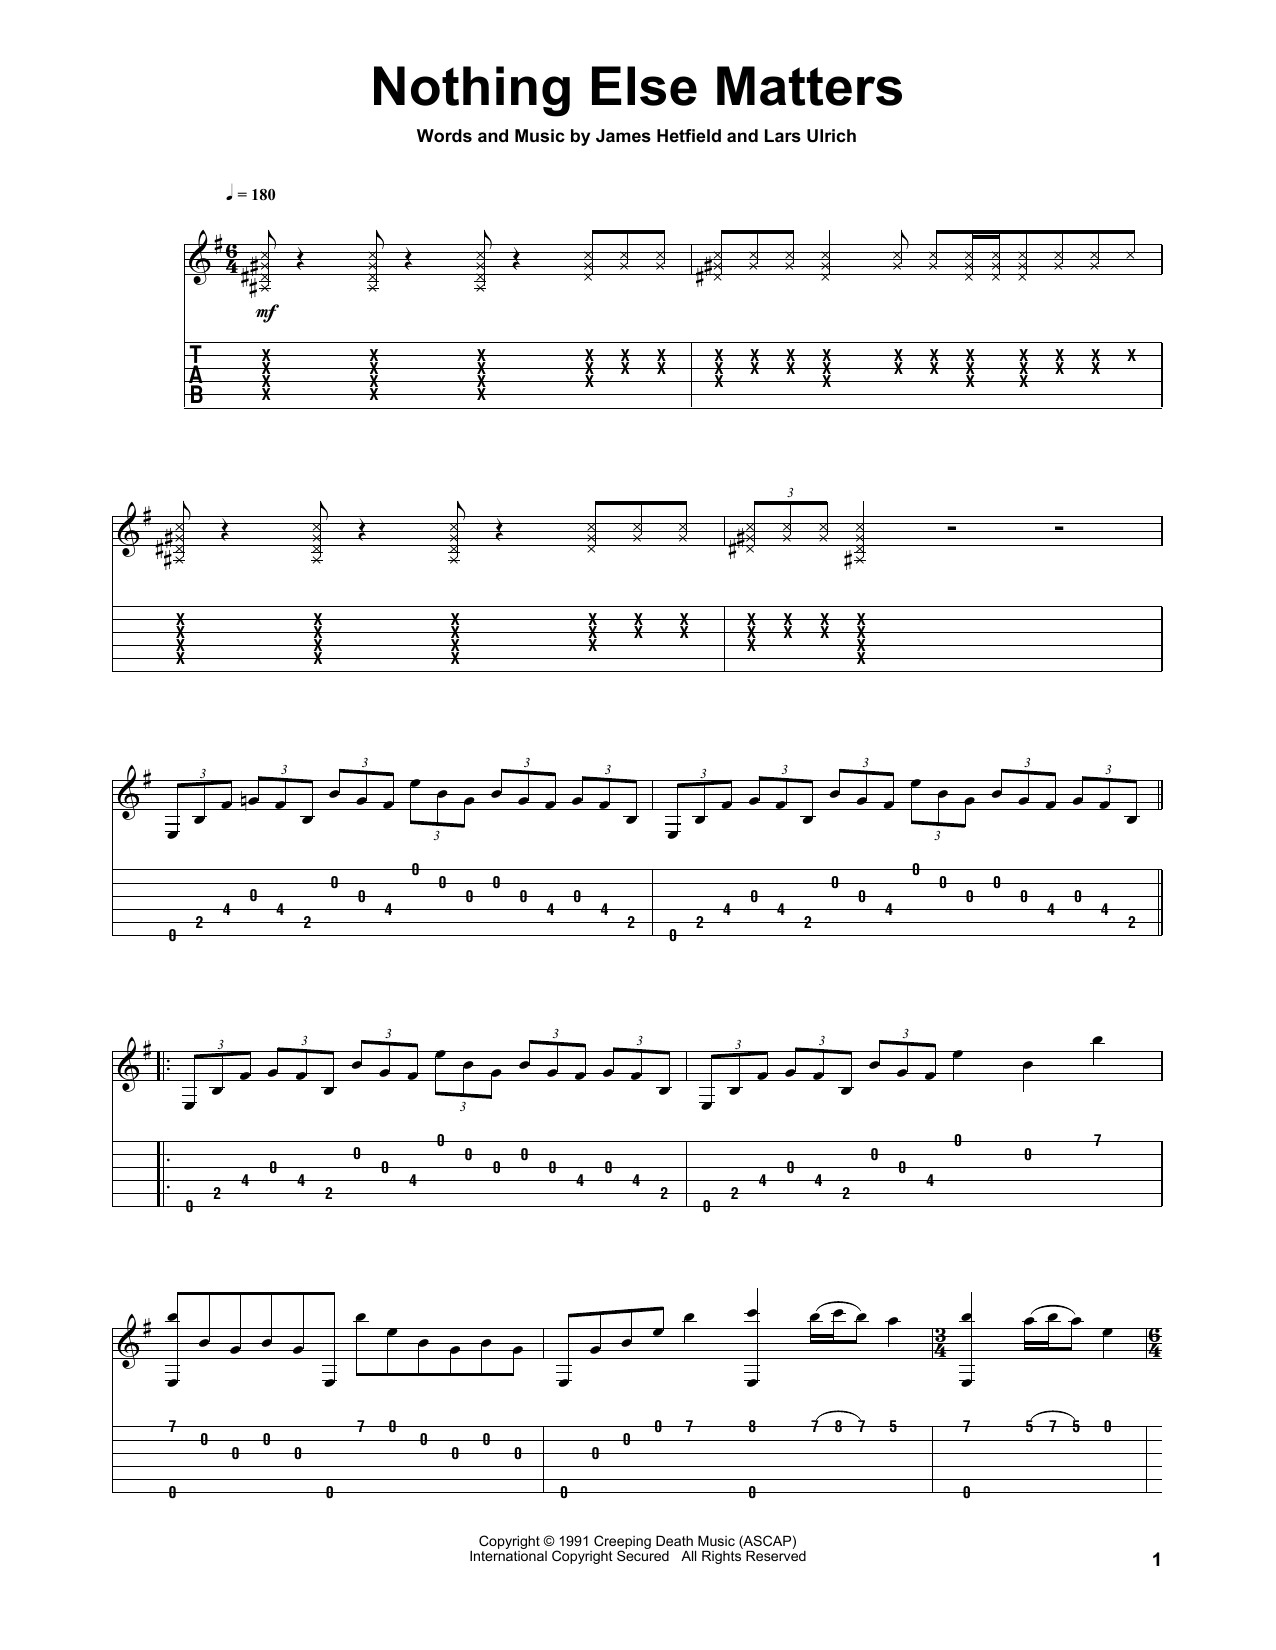 Nothing Else Matters Solo Tab
 Nothing Else Matters Sheet Music Metallica